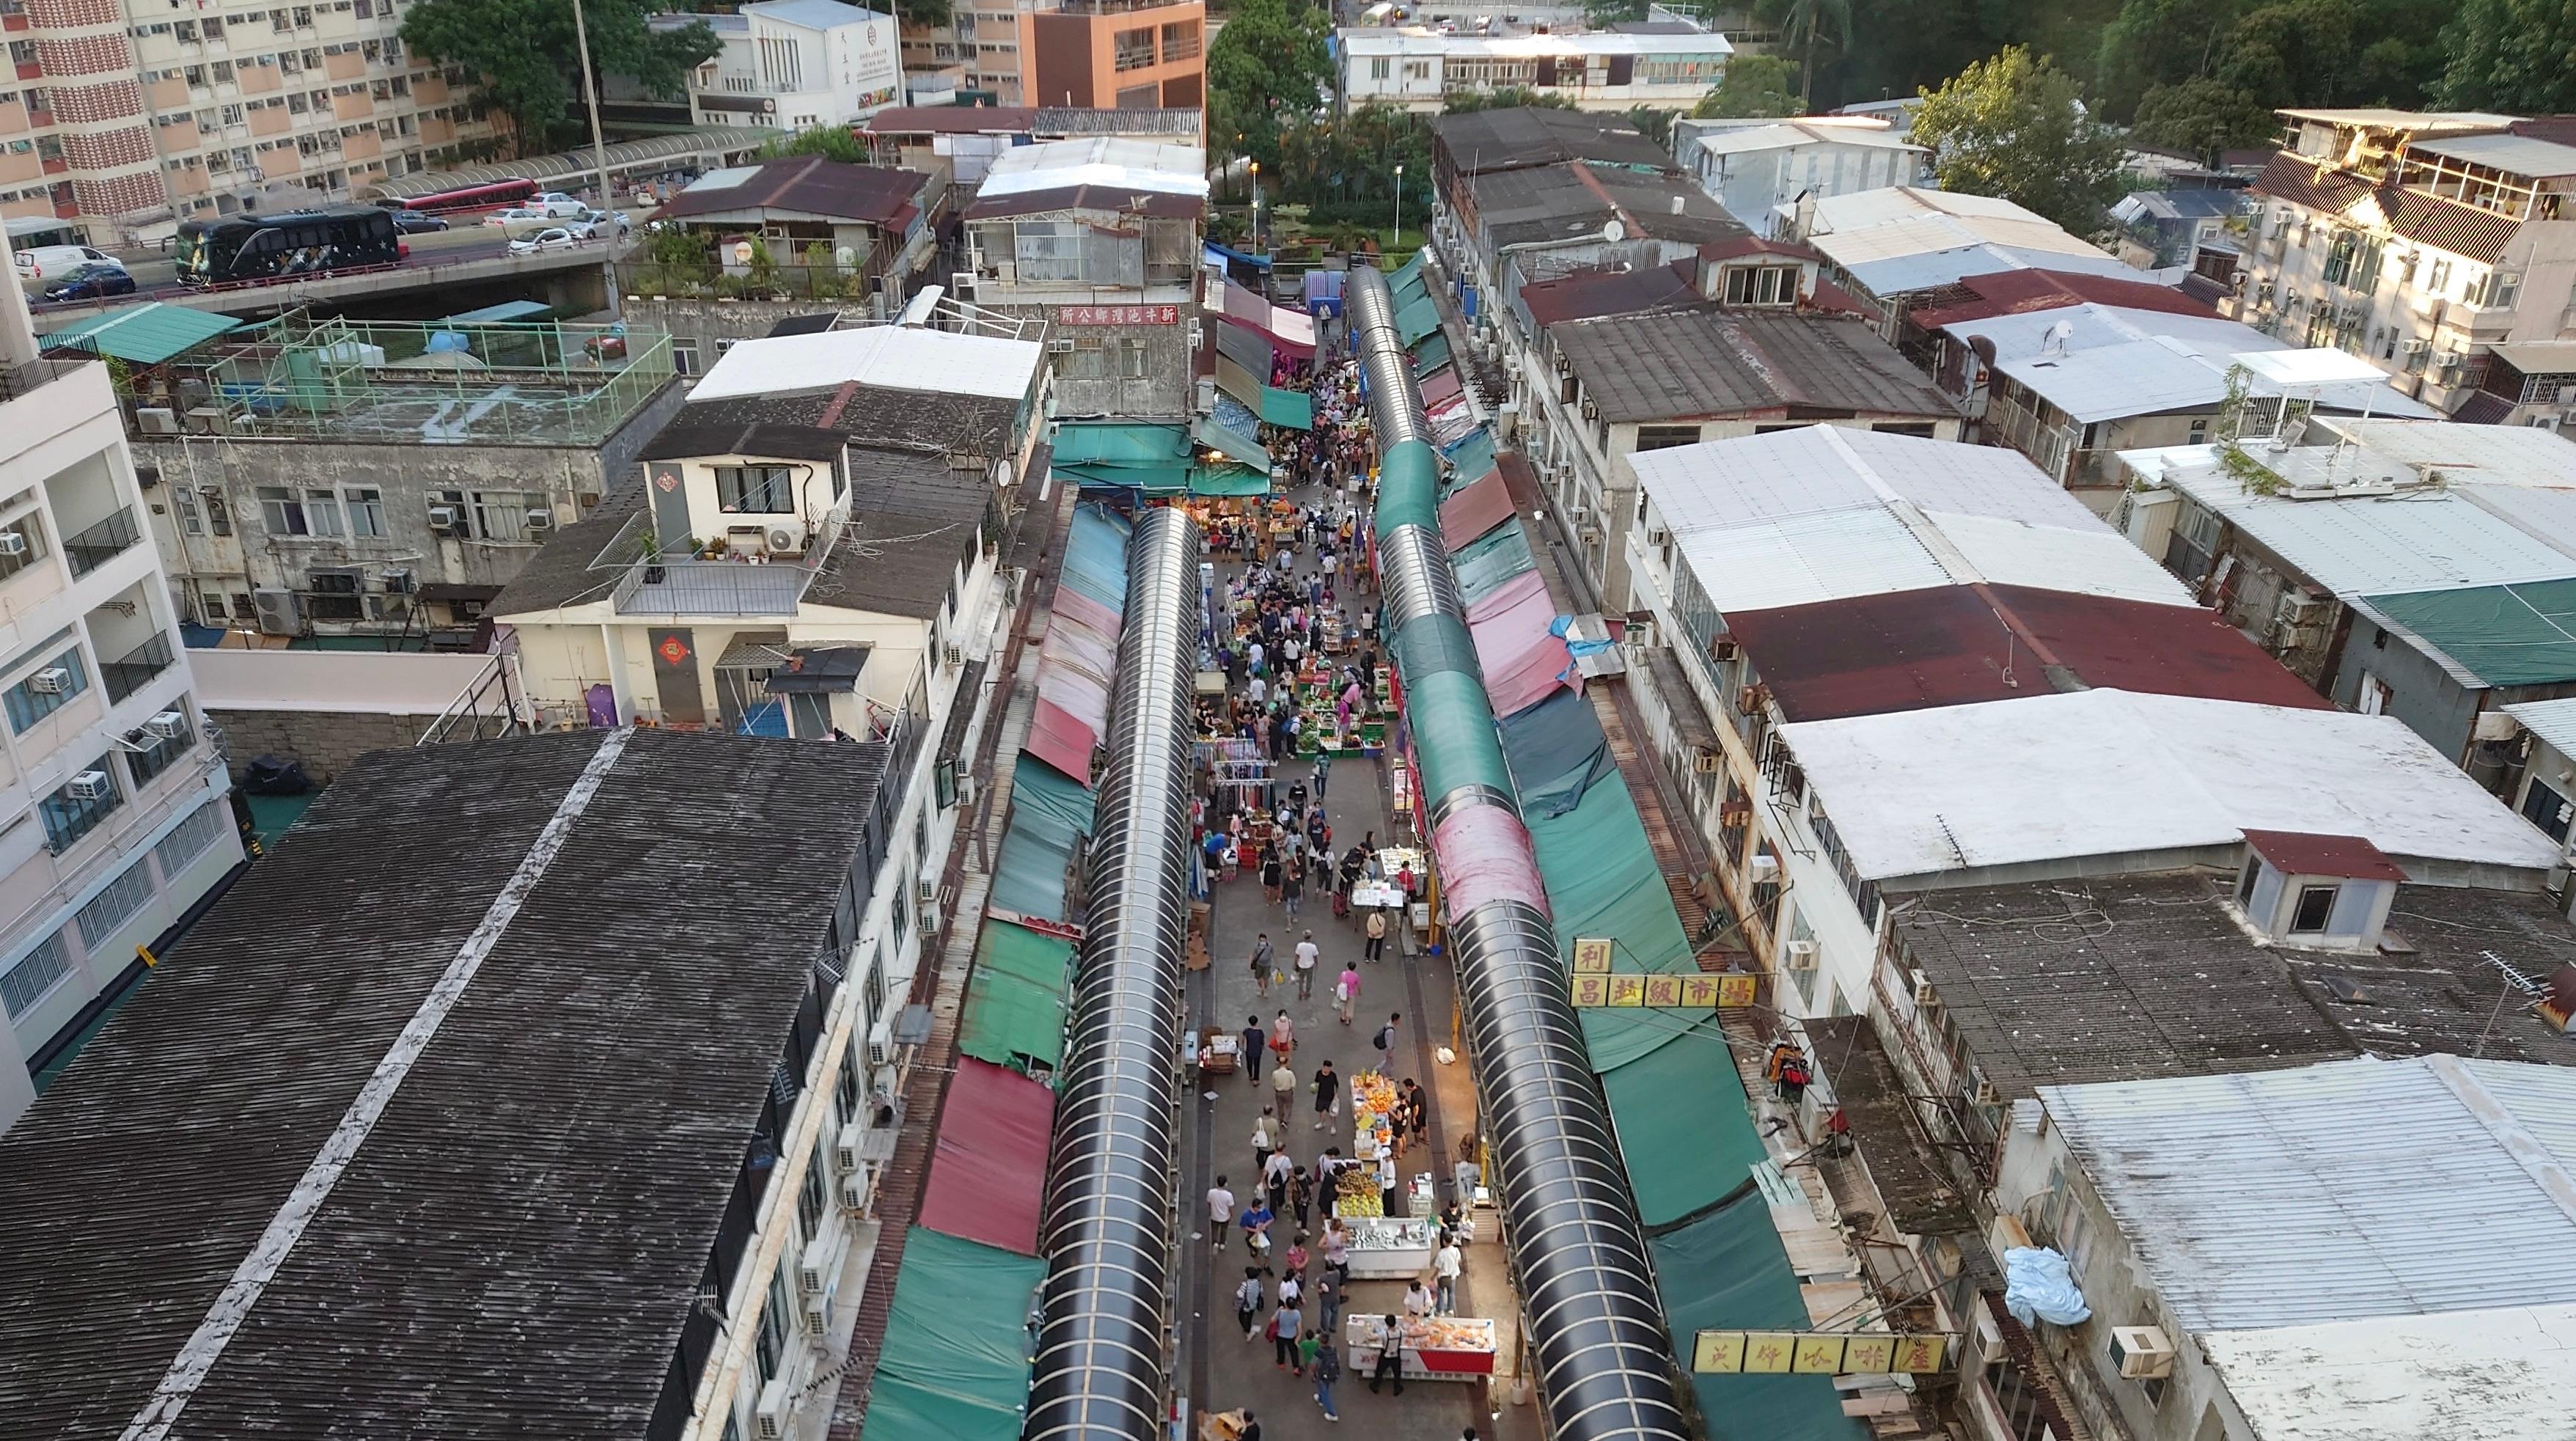 The Food and Environmental Hygiene Department and the Hong Kong Police Force today (February 29) conducted a joint operation to combat the serious shop front extension problem at Ngau Chi Wan Village in Wong Tai Sin which has persisted for many years. Photo shows the condition of Ngau Chi Wan Village before the operation.